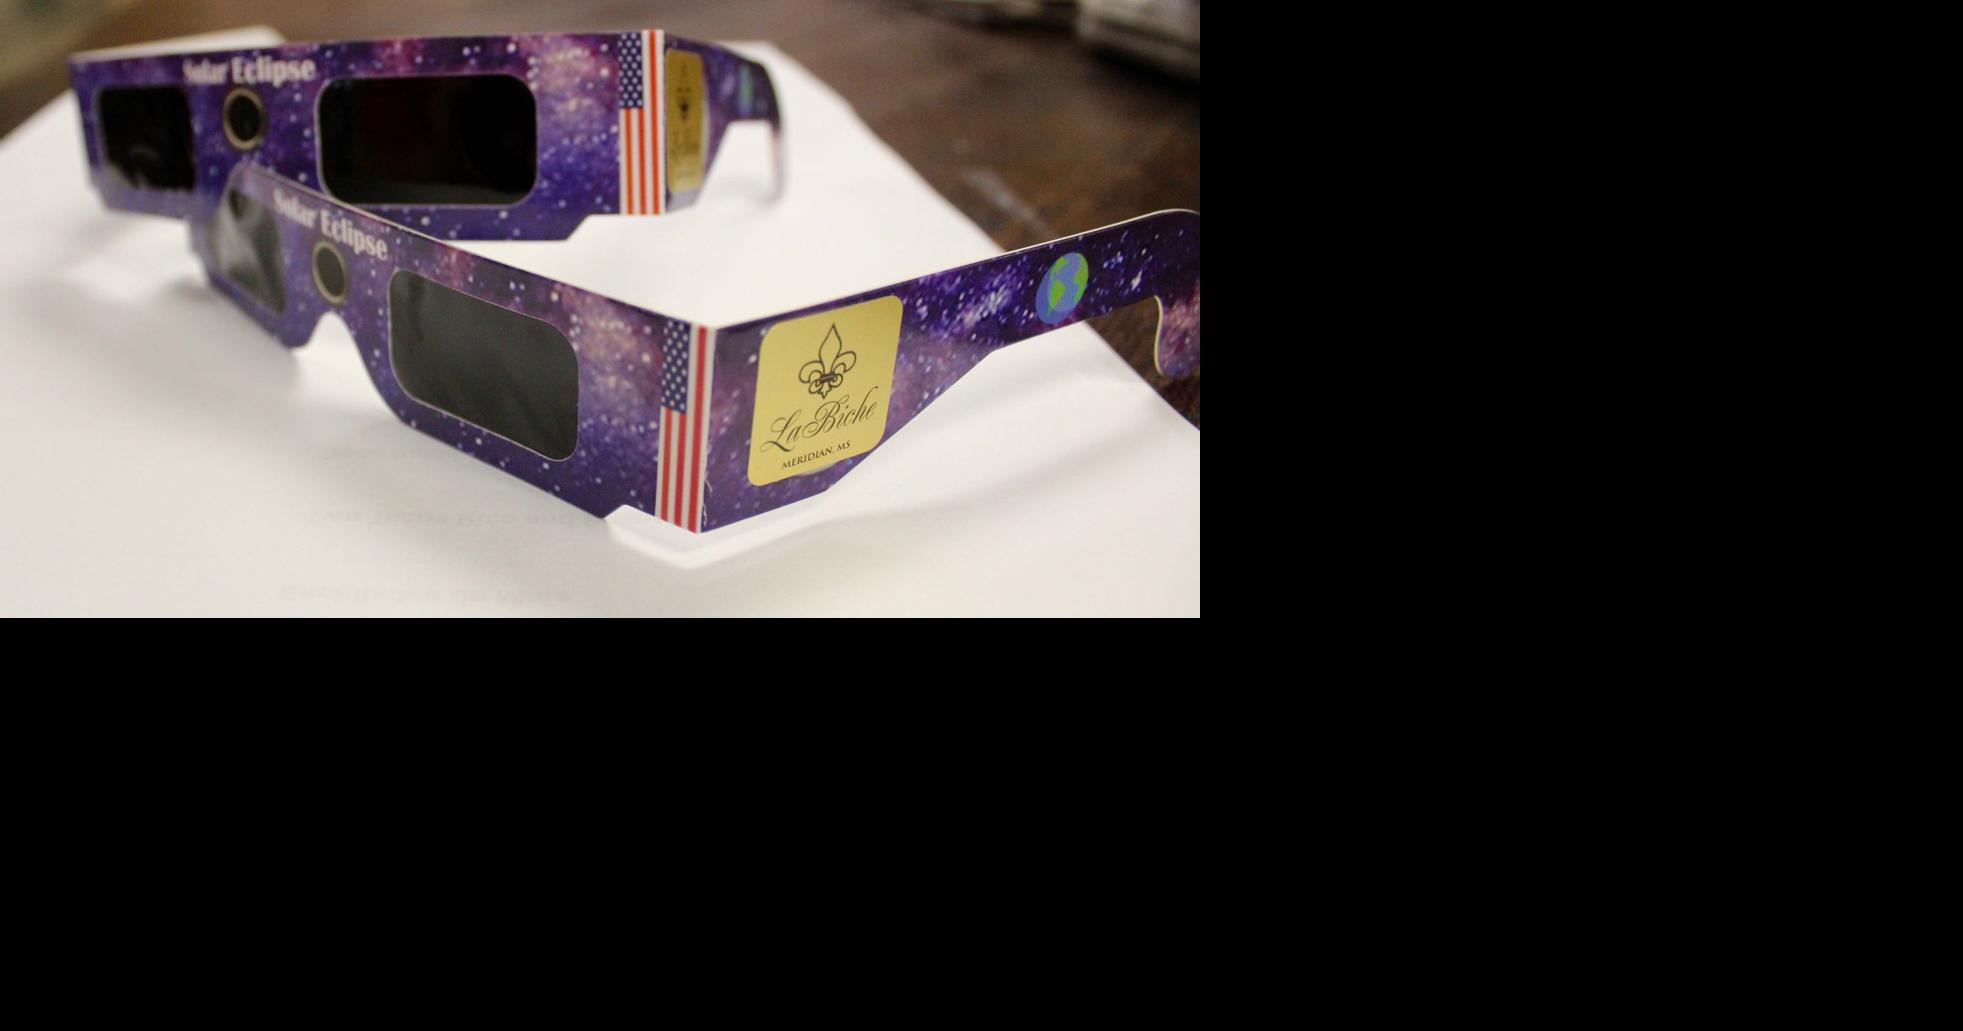 Solar eclipse glasses recalled in Meridian Local News